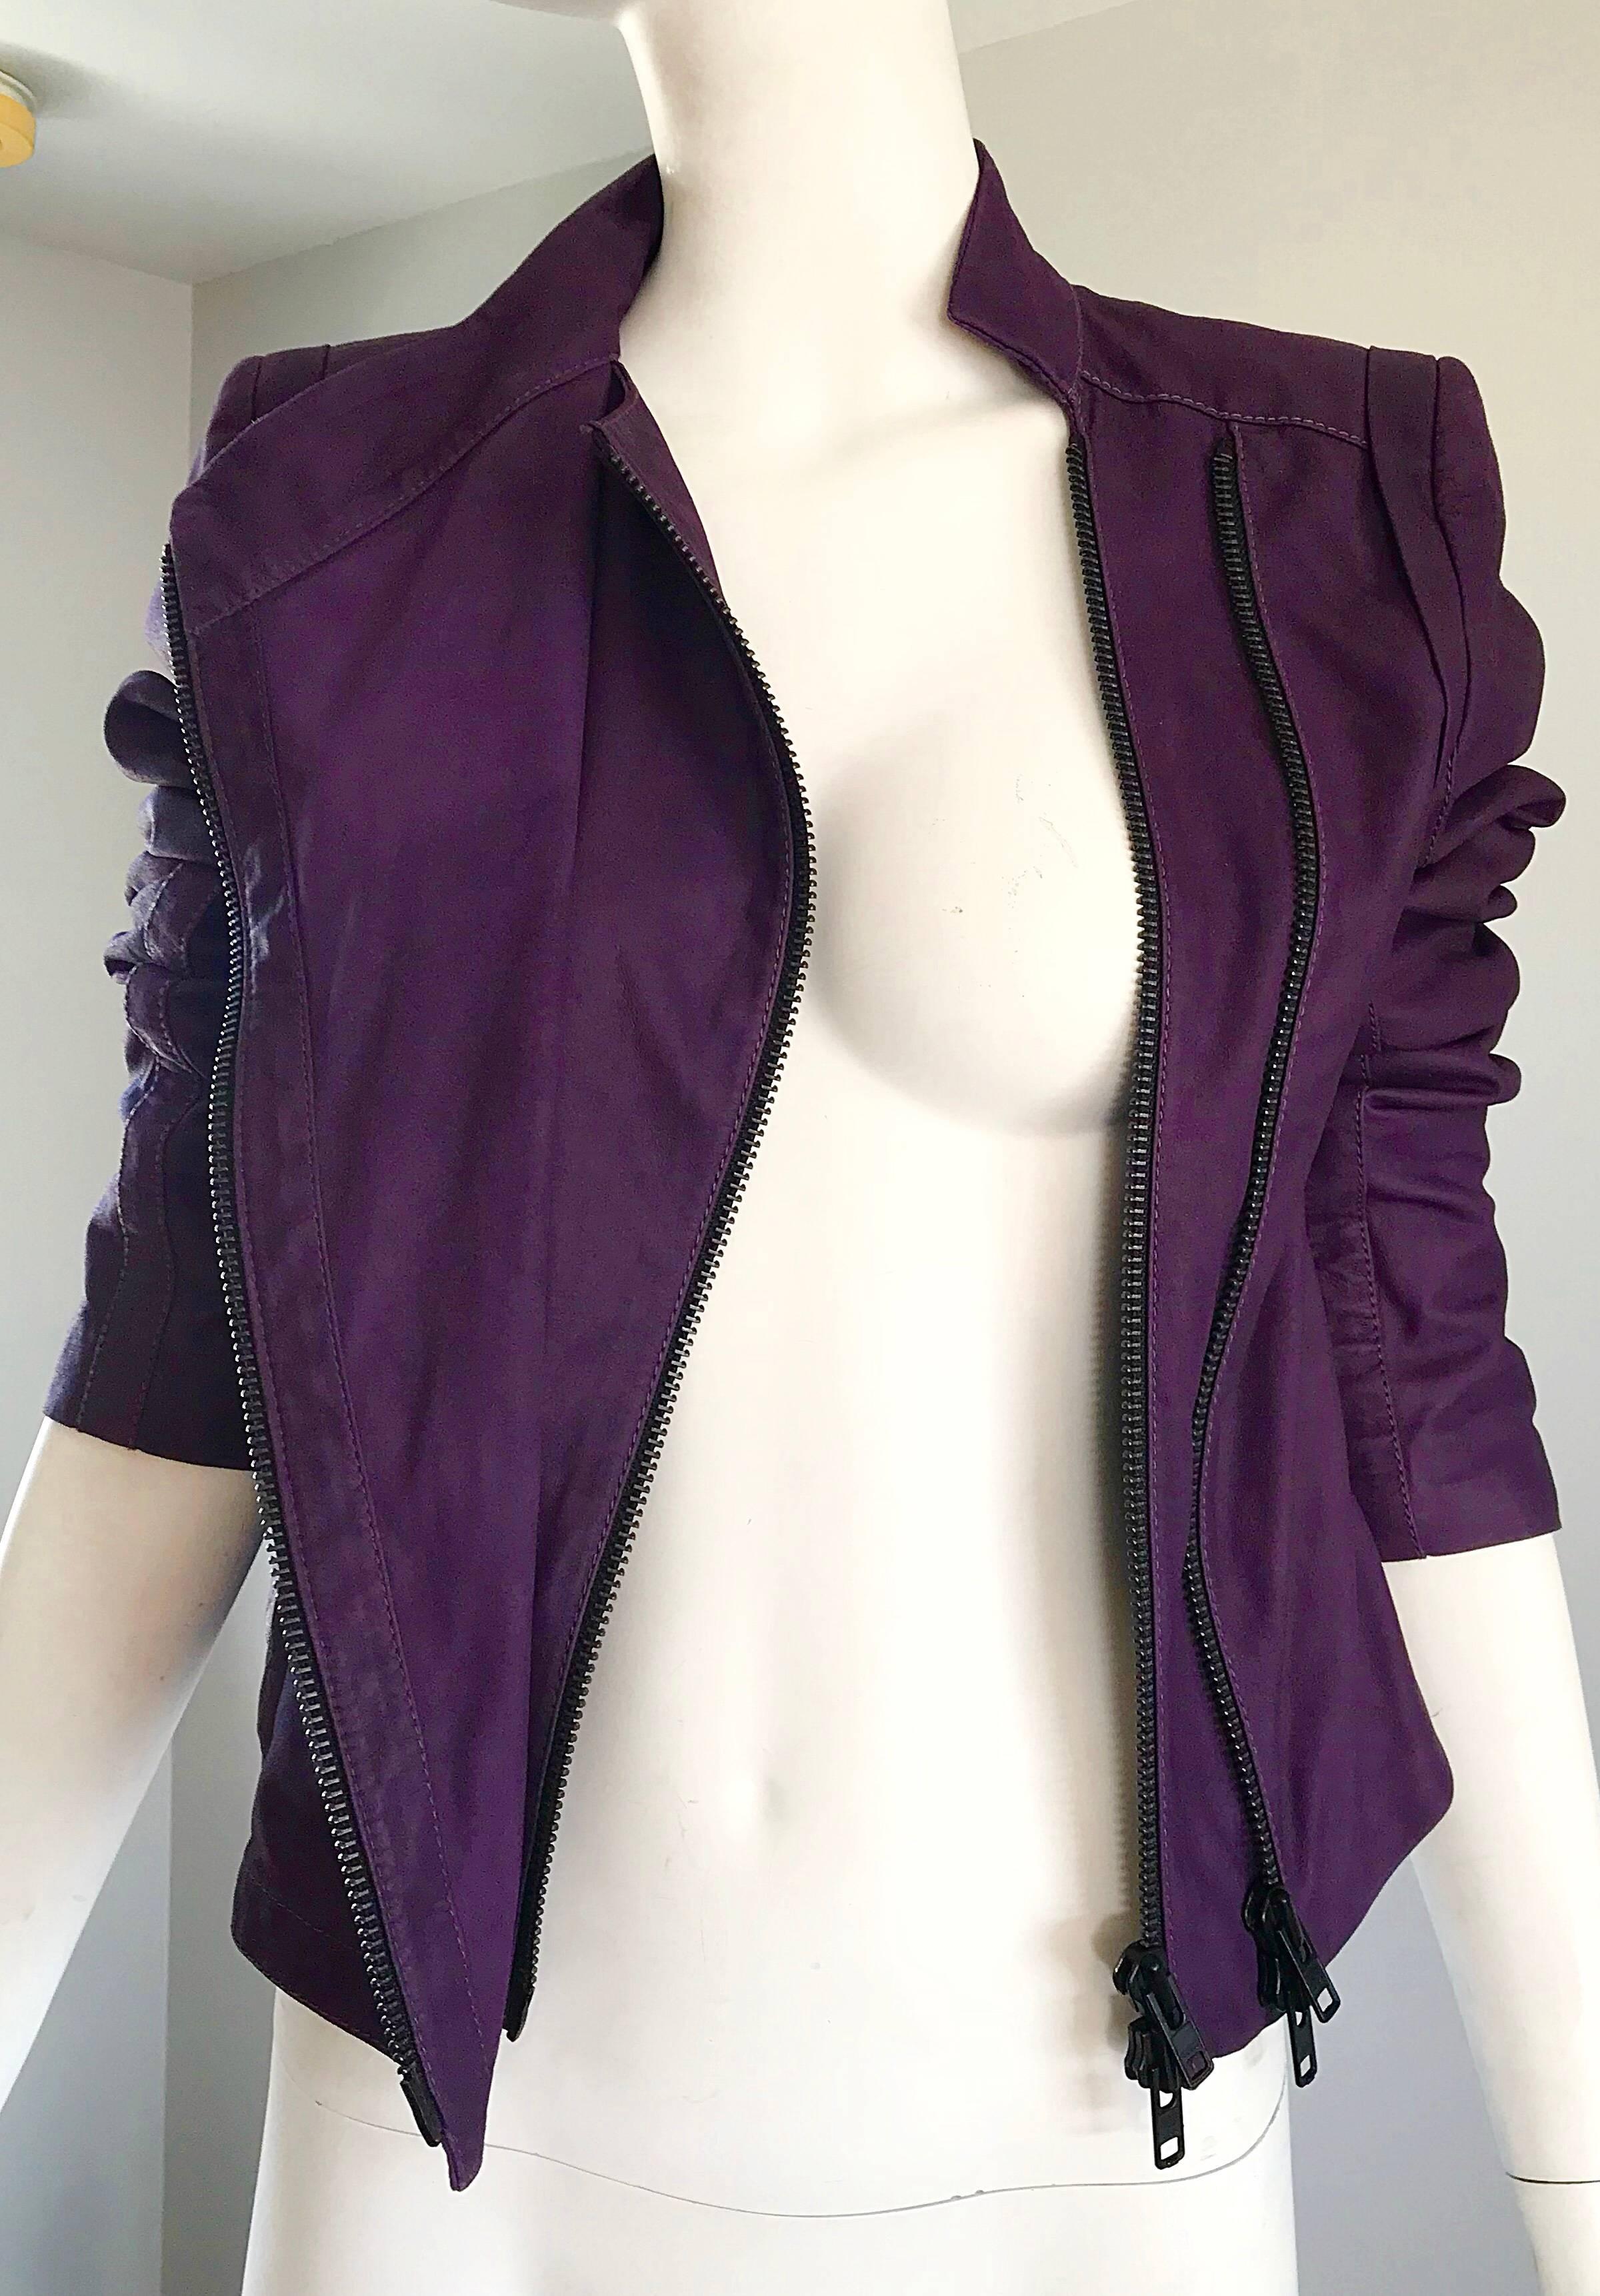 Ann Demeulemeester 1990s Purple Eggplant Leather 90s Fitted Vintage Moto Jacket For Sale 2